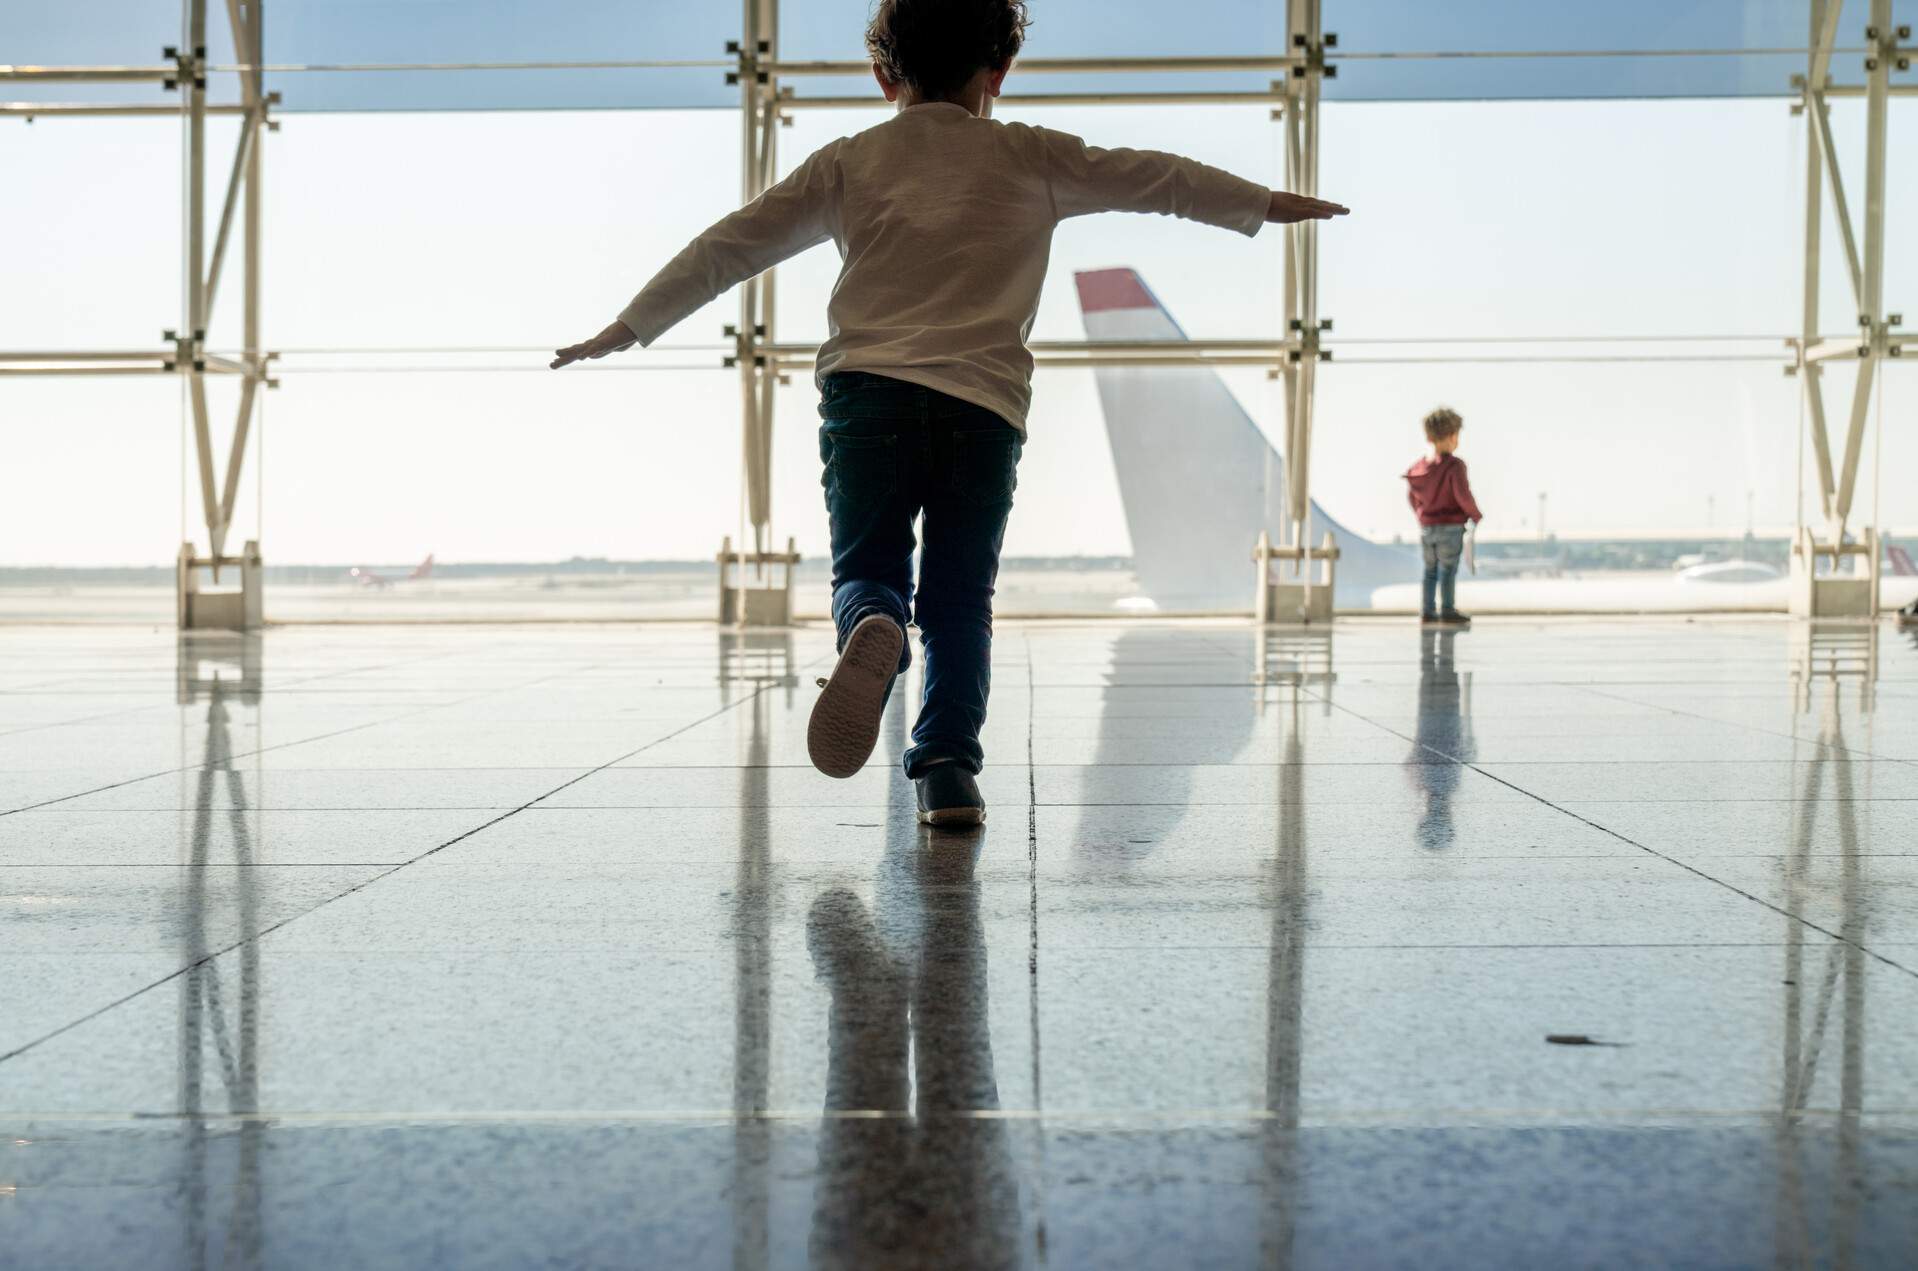 A kid running in the airport with his arms stretched like airplane wings